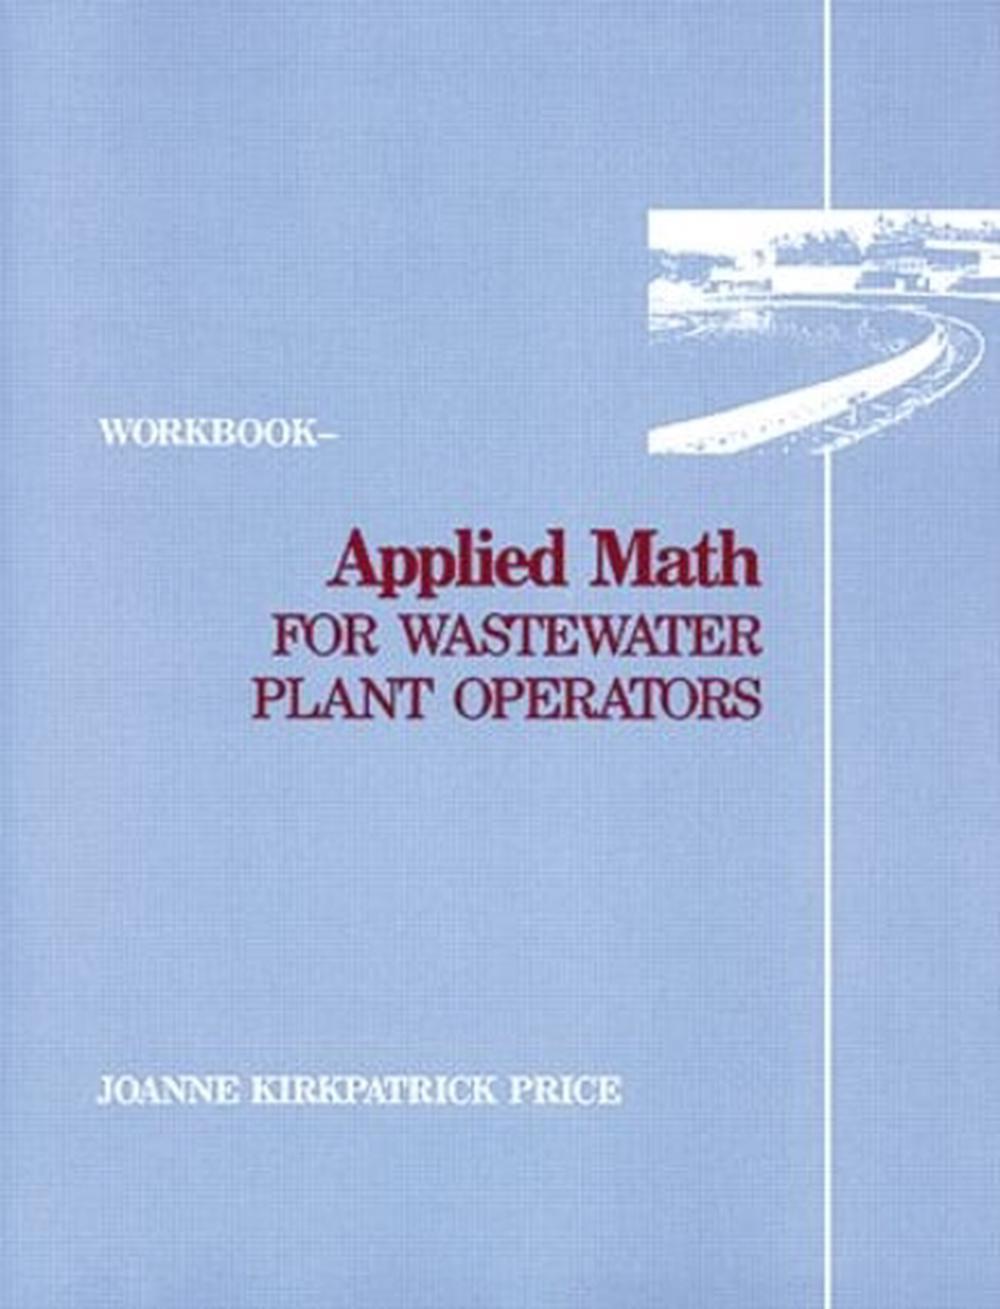 Applied Math for Wastewater Plant Operators Workbook by Joanne K